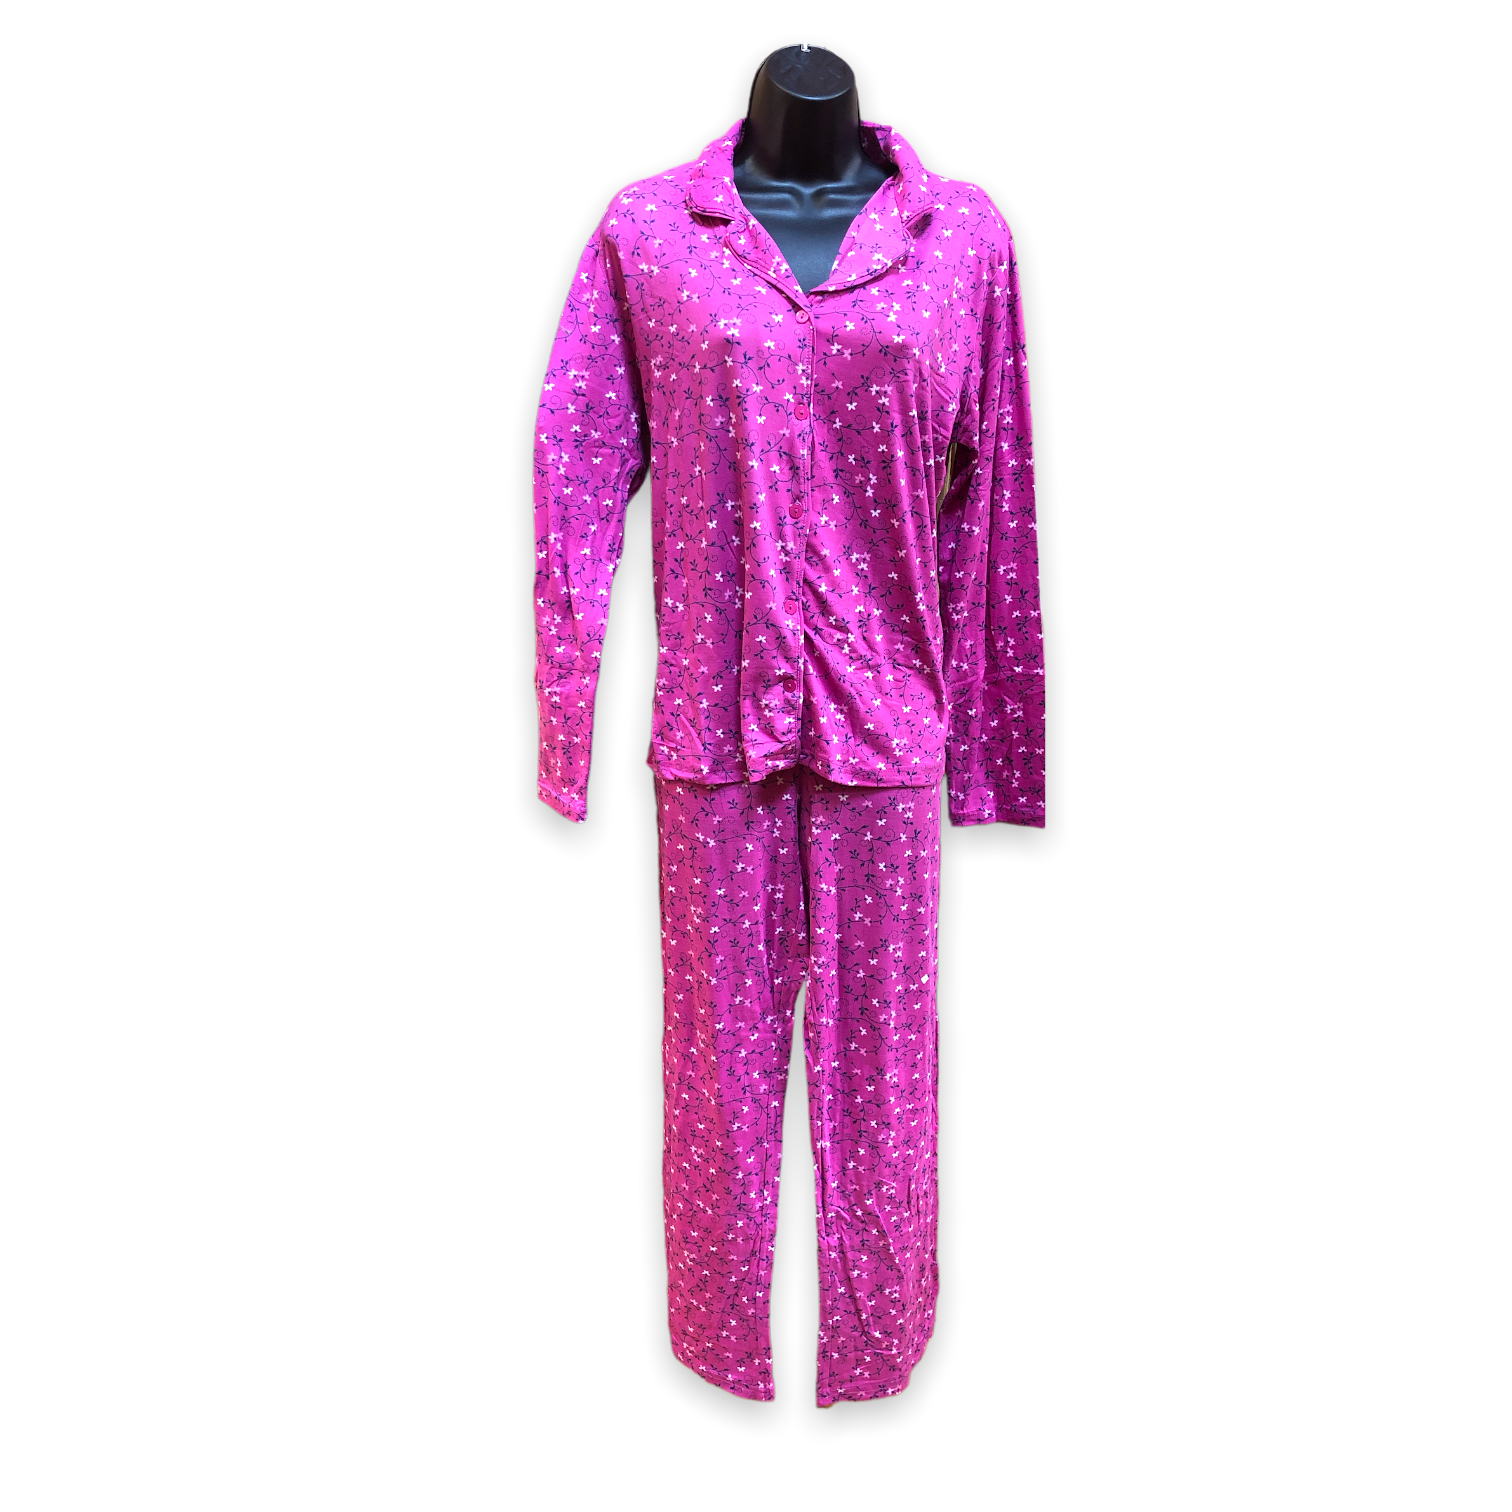 BULK BUY - Women's Two Piece Peached Jersey Notched Collar Pajama Sets (Gift Packaged) (6-Pack)